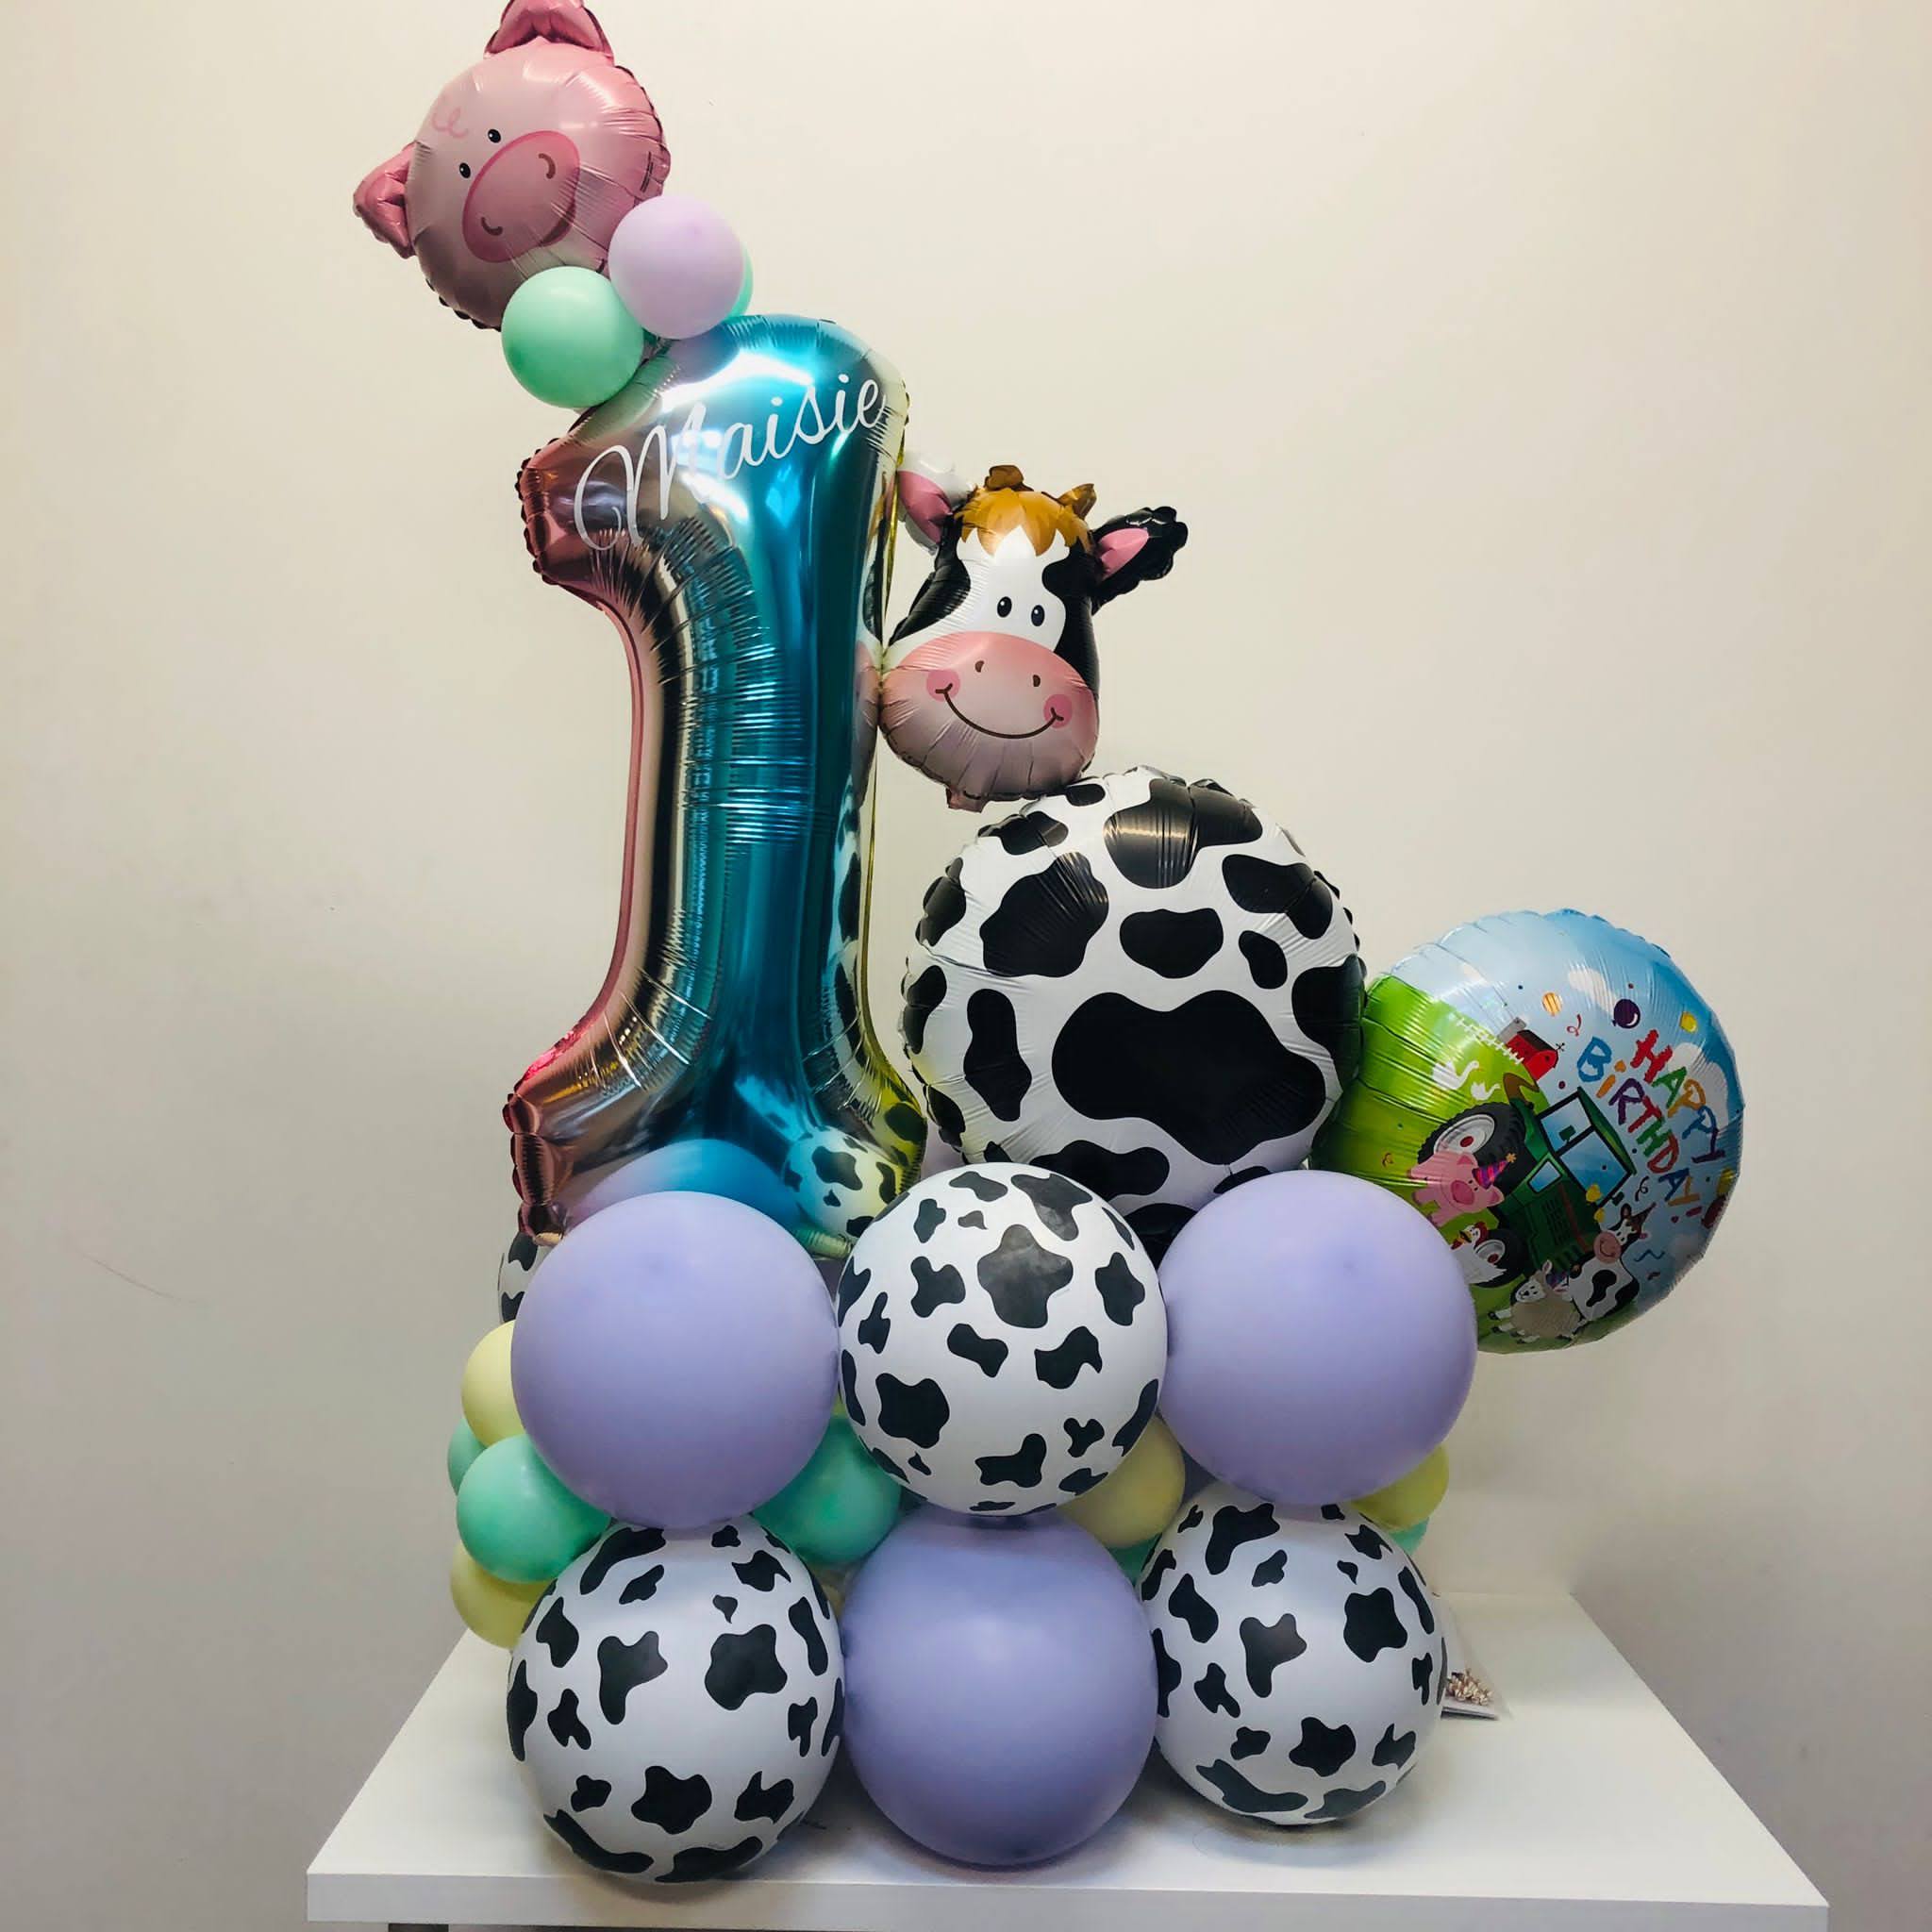 A farm Themed Balloon Extravaganza Age 1 with personalised Balloon